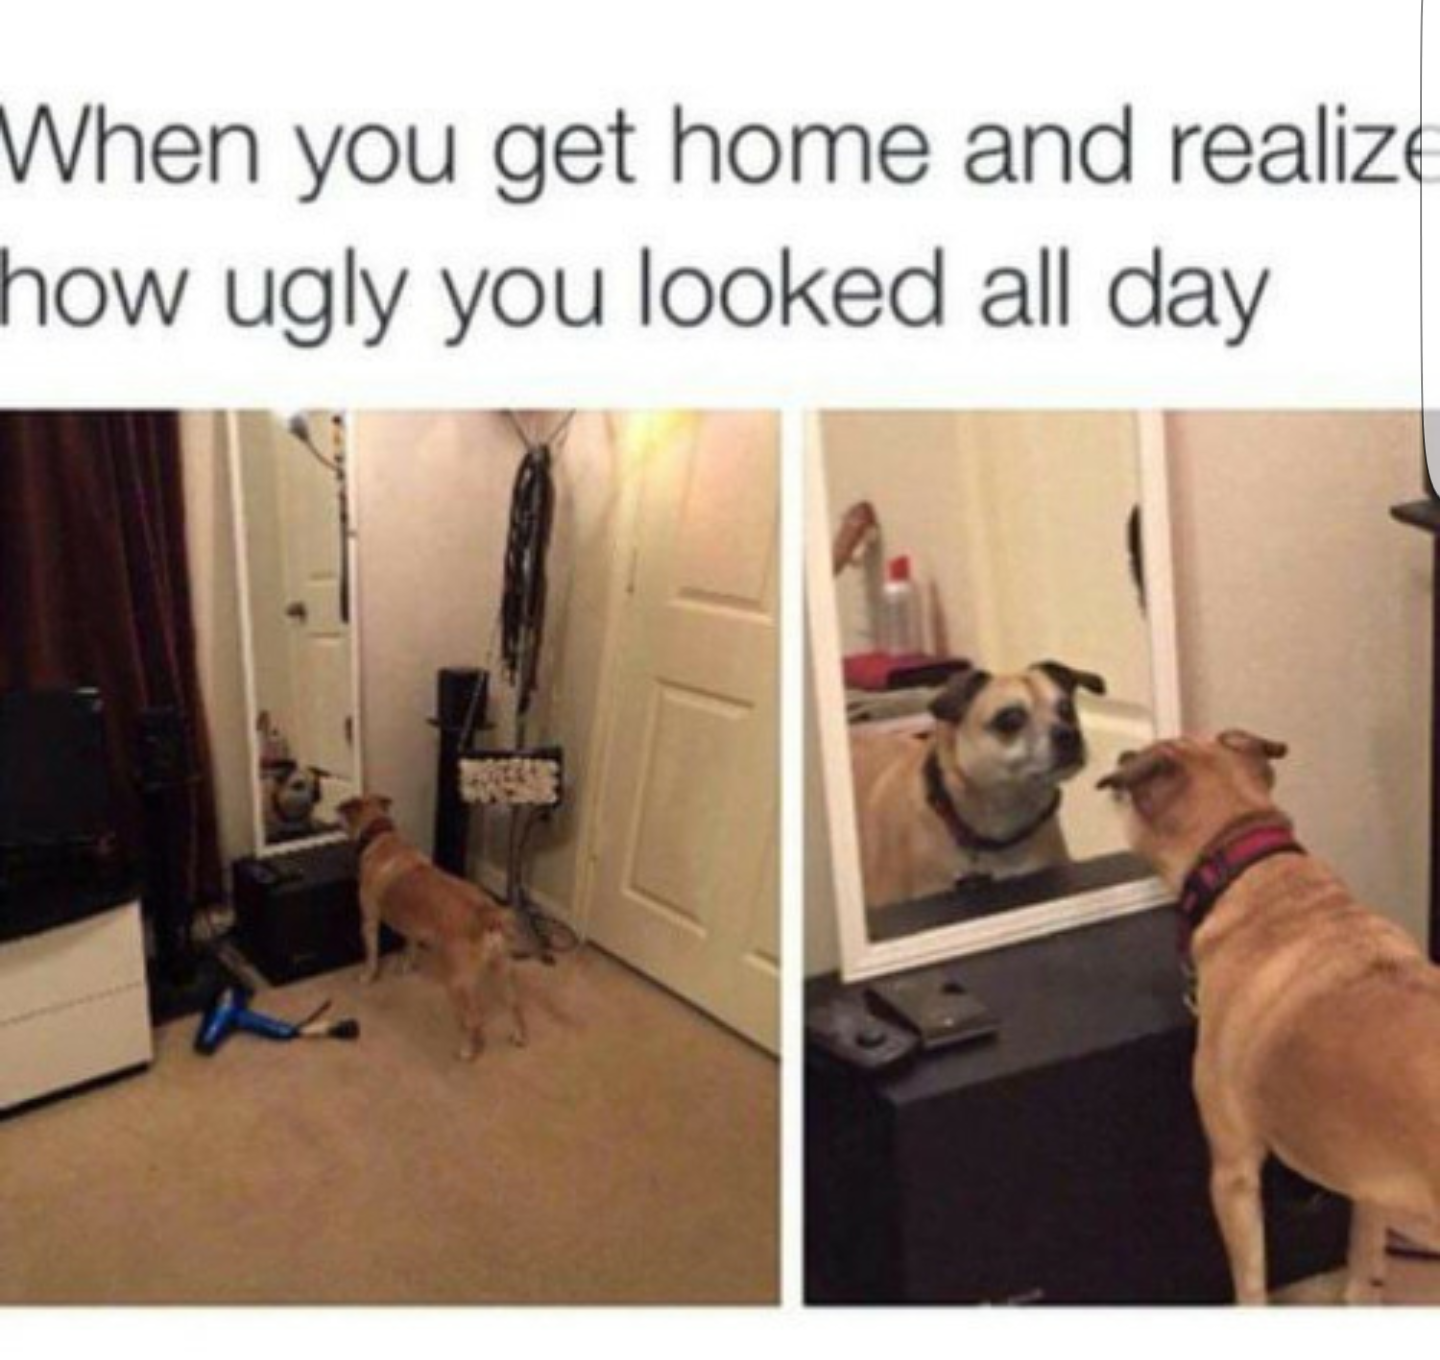 you get home and look - When you get home and realize how ugly you looked all day